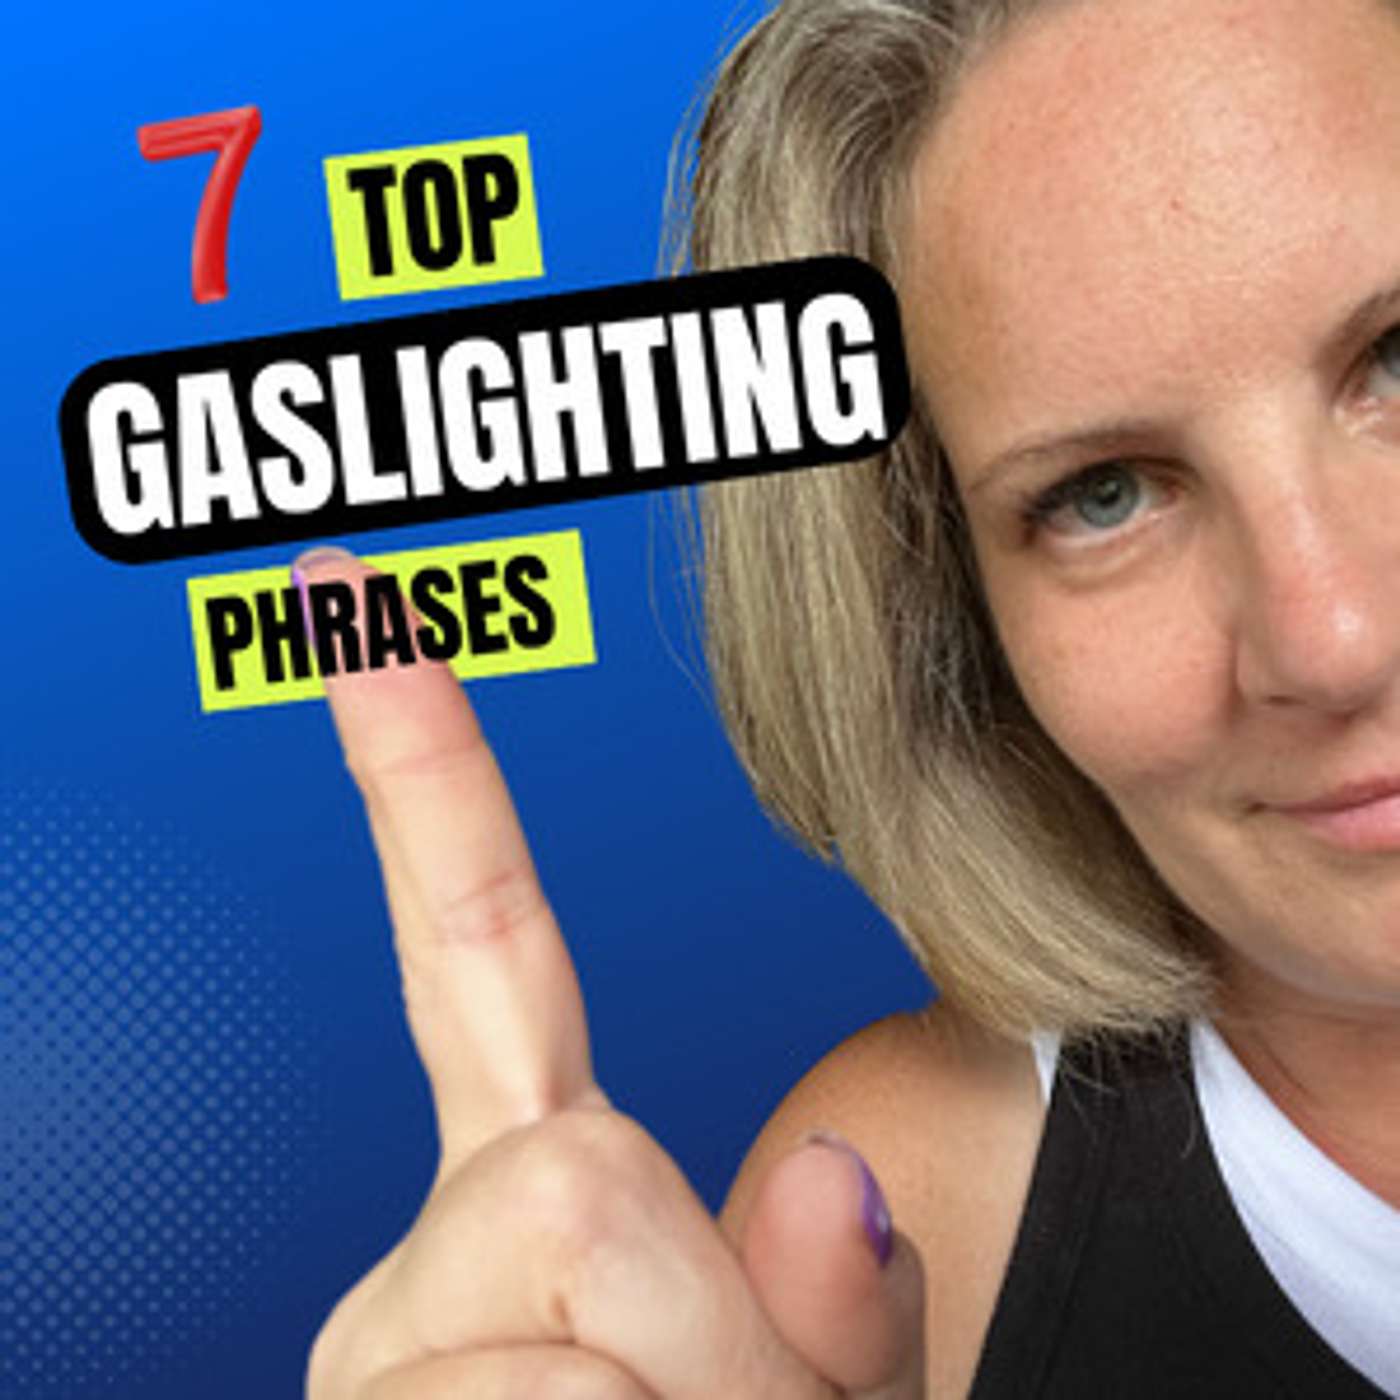 What are the TOP 7 Gaslighting Phrases Manipulators or Narcissists Use